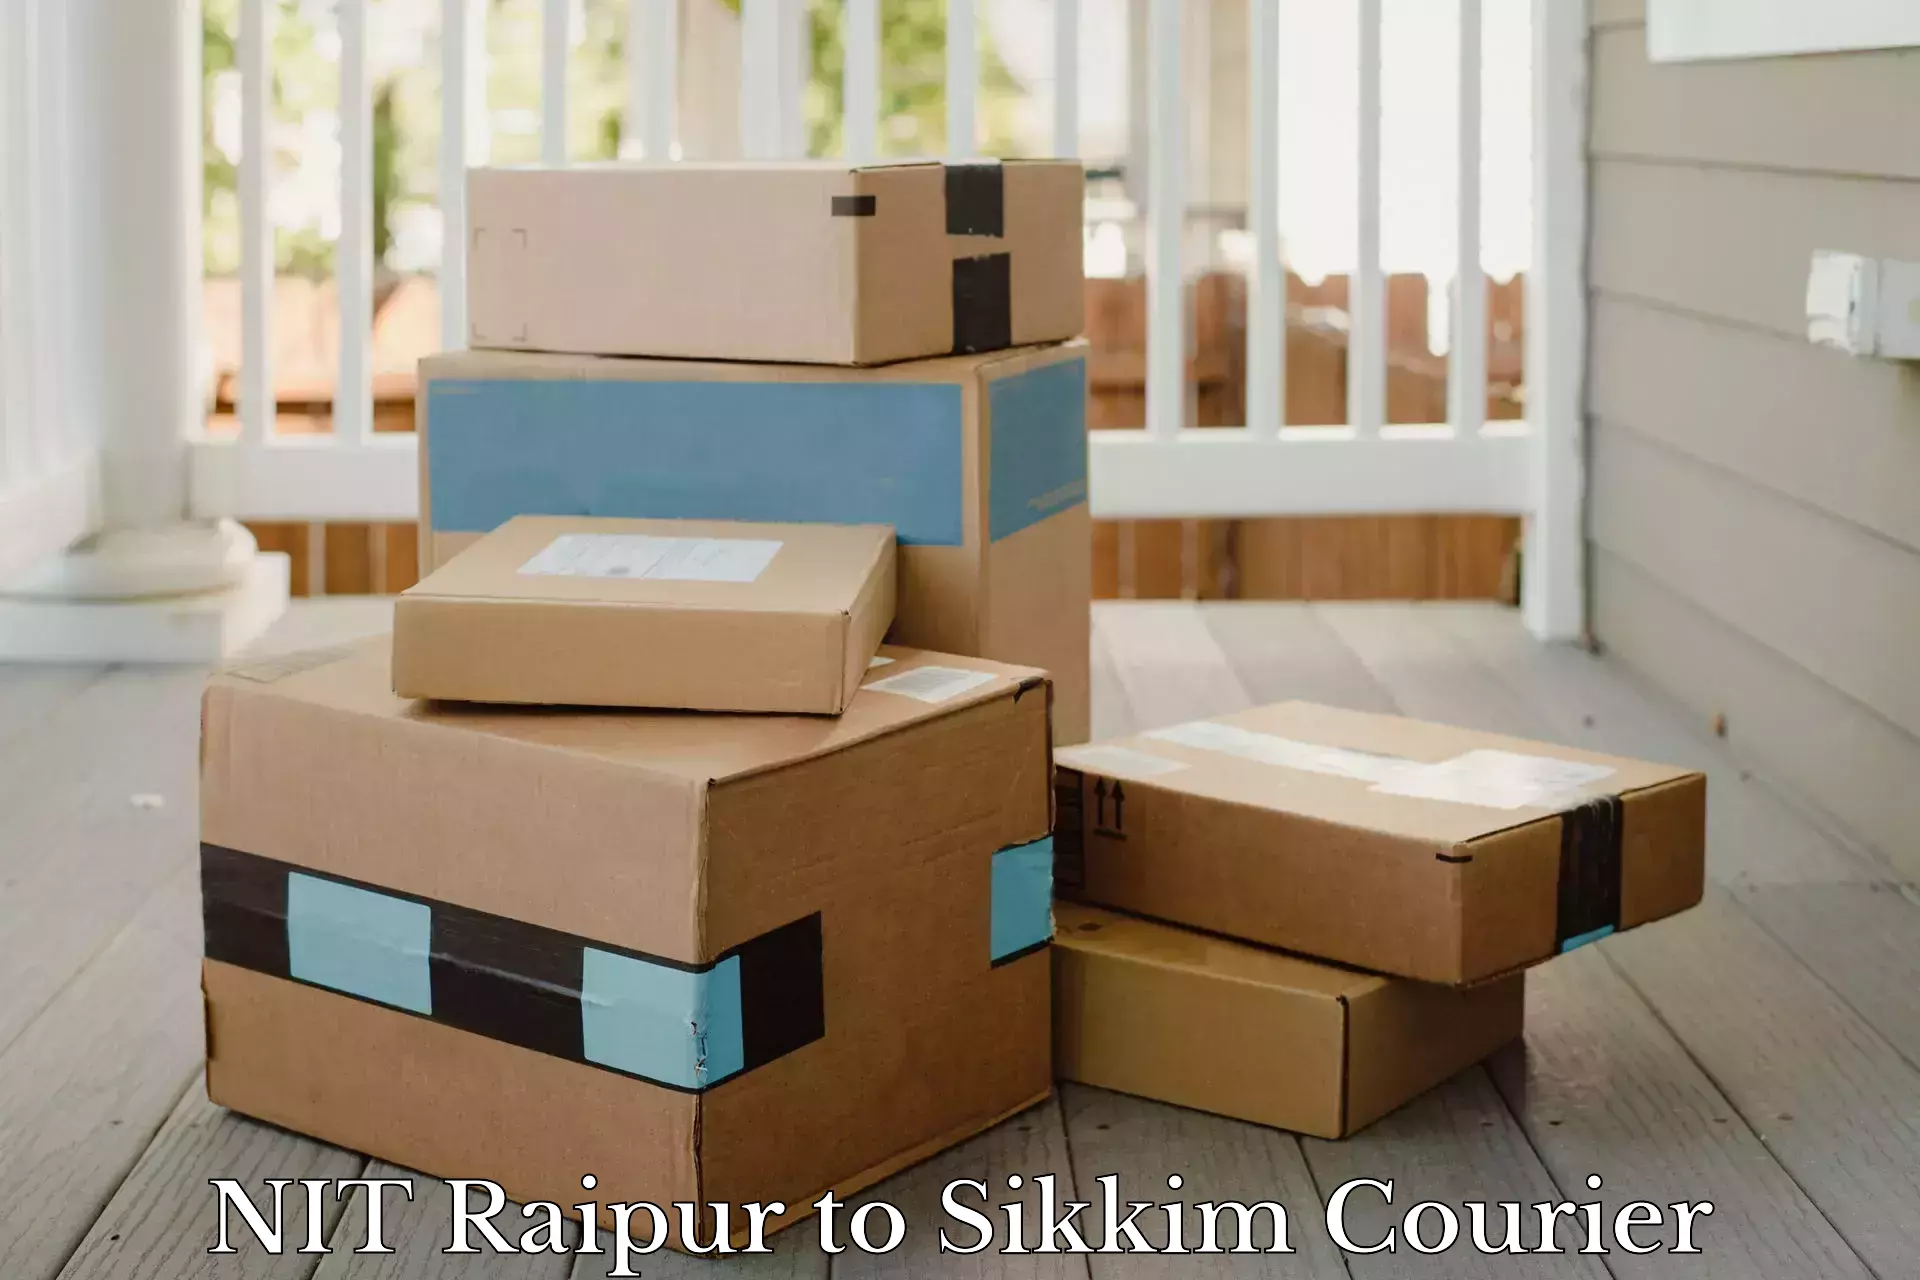 Business delivery service NIT Raipur to Sikkim